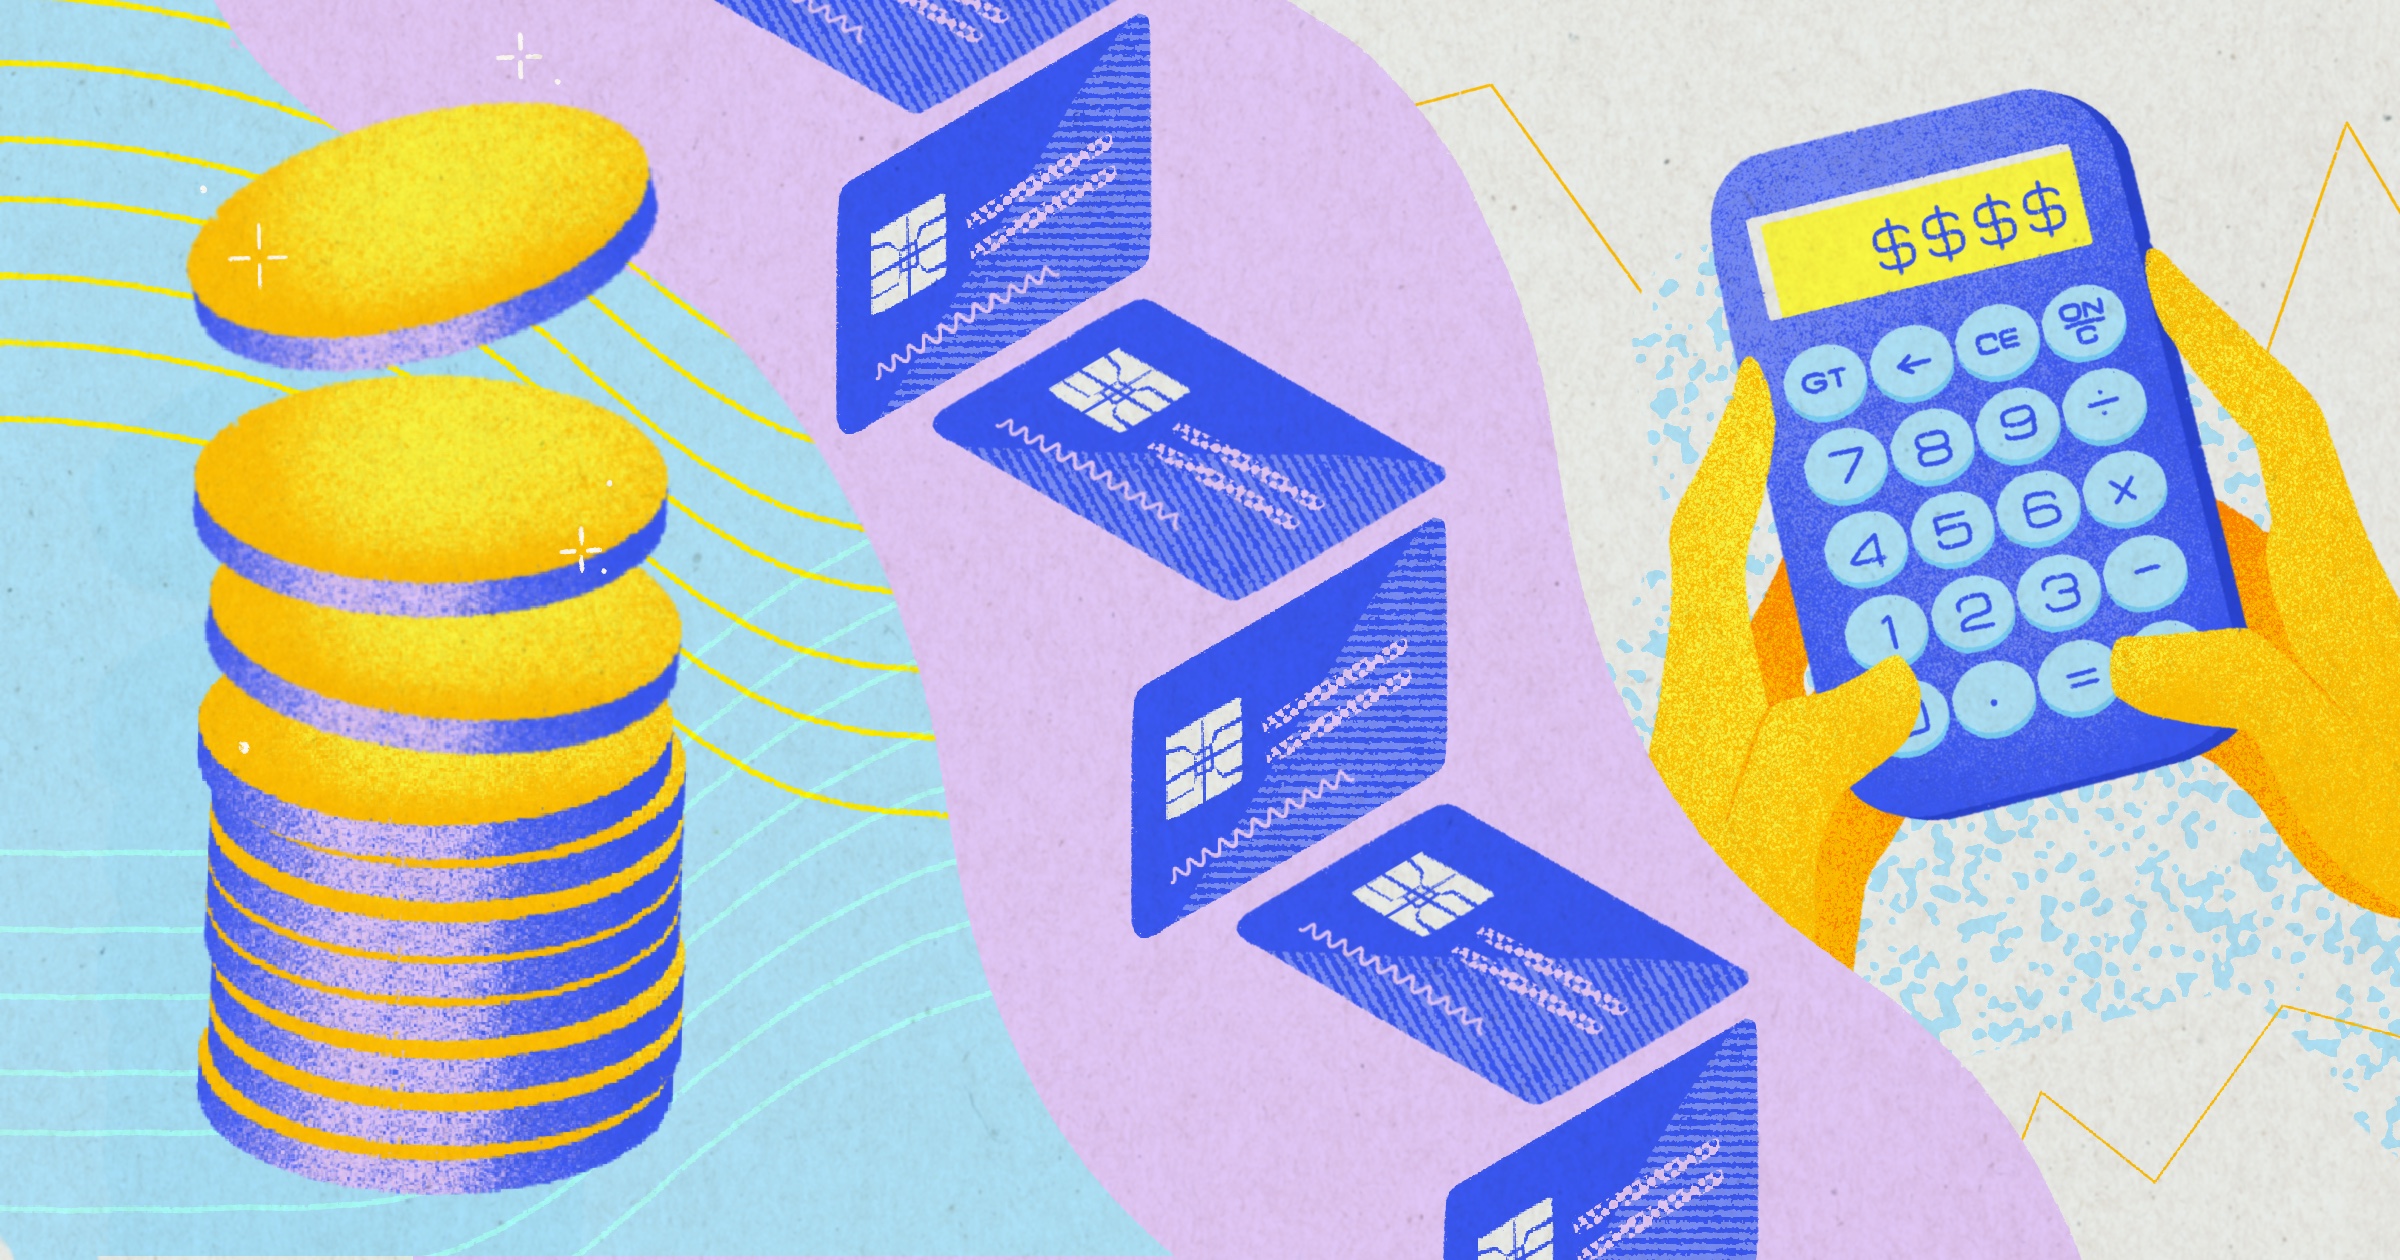 A purple graphic featuring a stack of yellow coins, a line of blue credit cards, and a calculator.